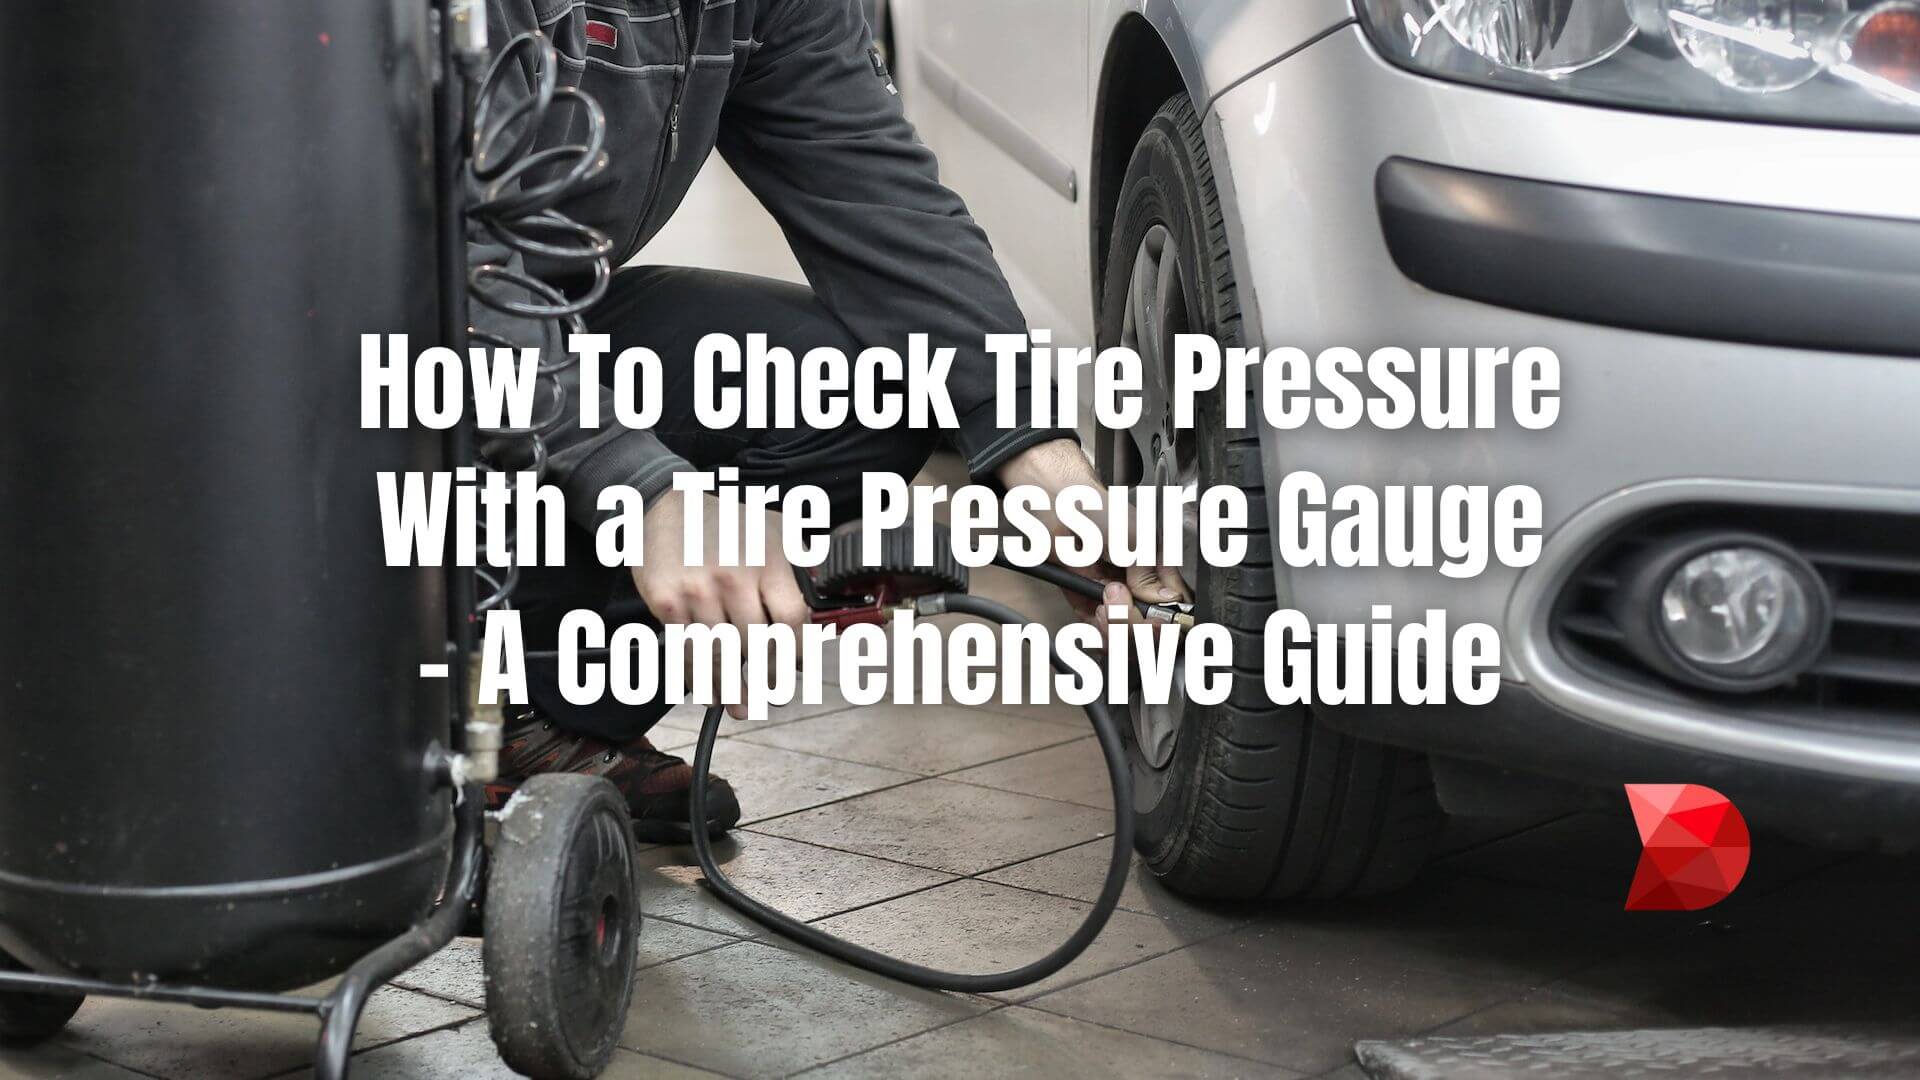 Having the right tire pressure is critical to a safe, efficient, and comfortable ride. Here's how to use a pressure gauge to check your tire.